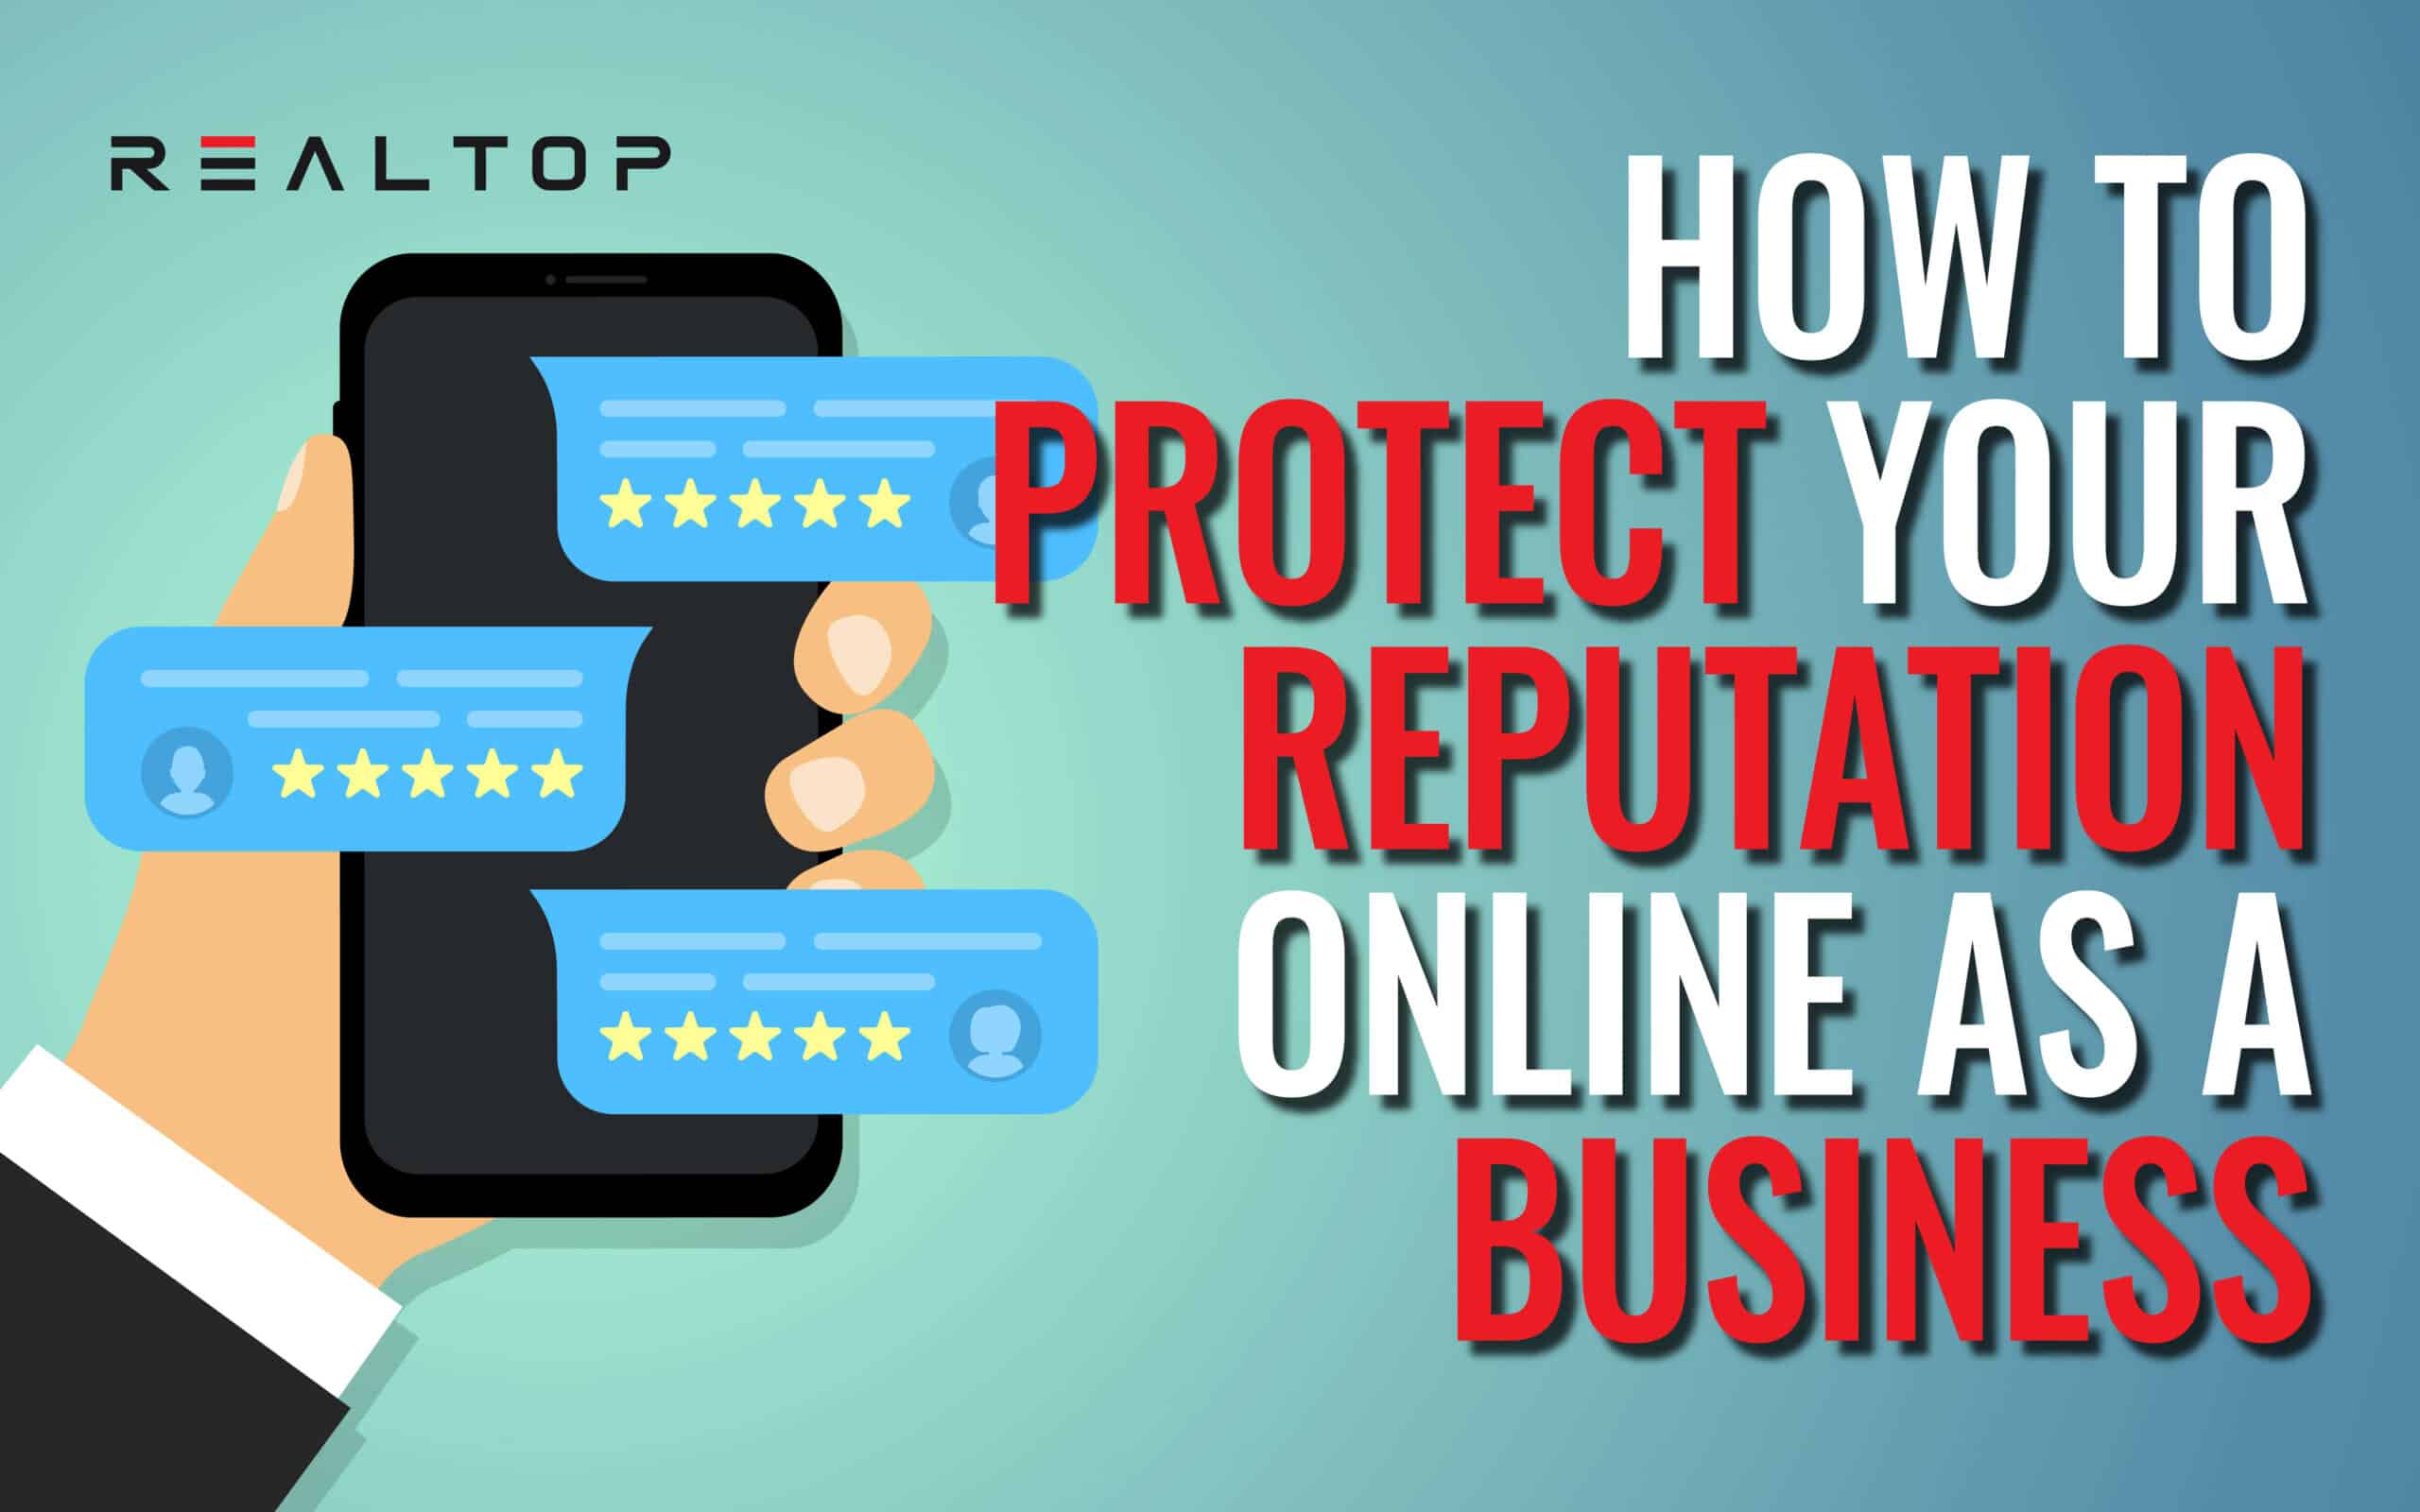 How to Protect your Reputation Online